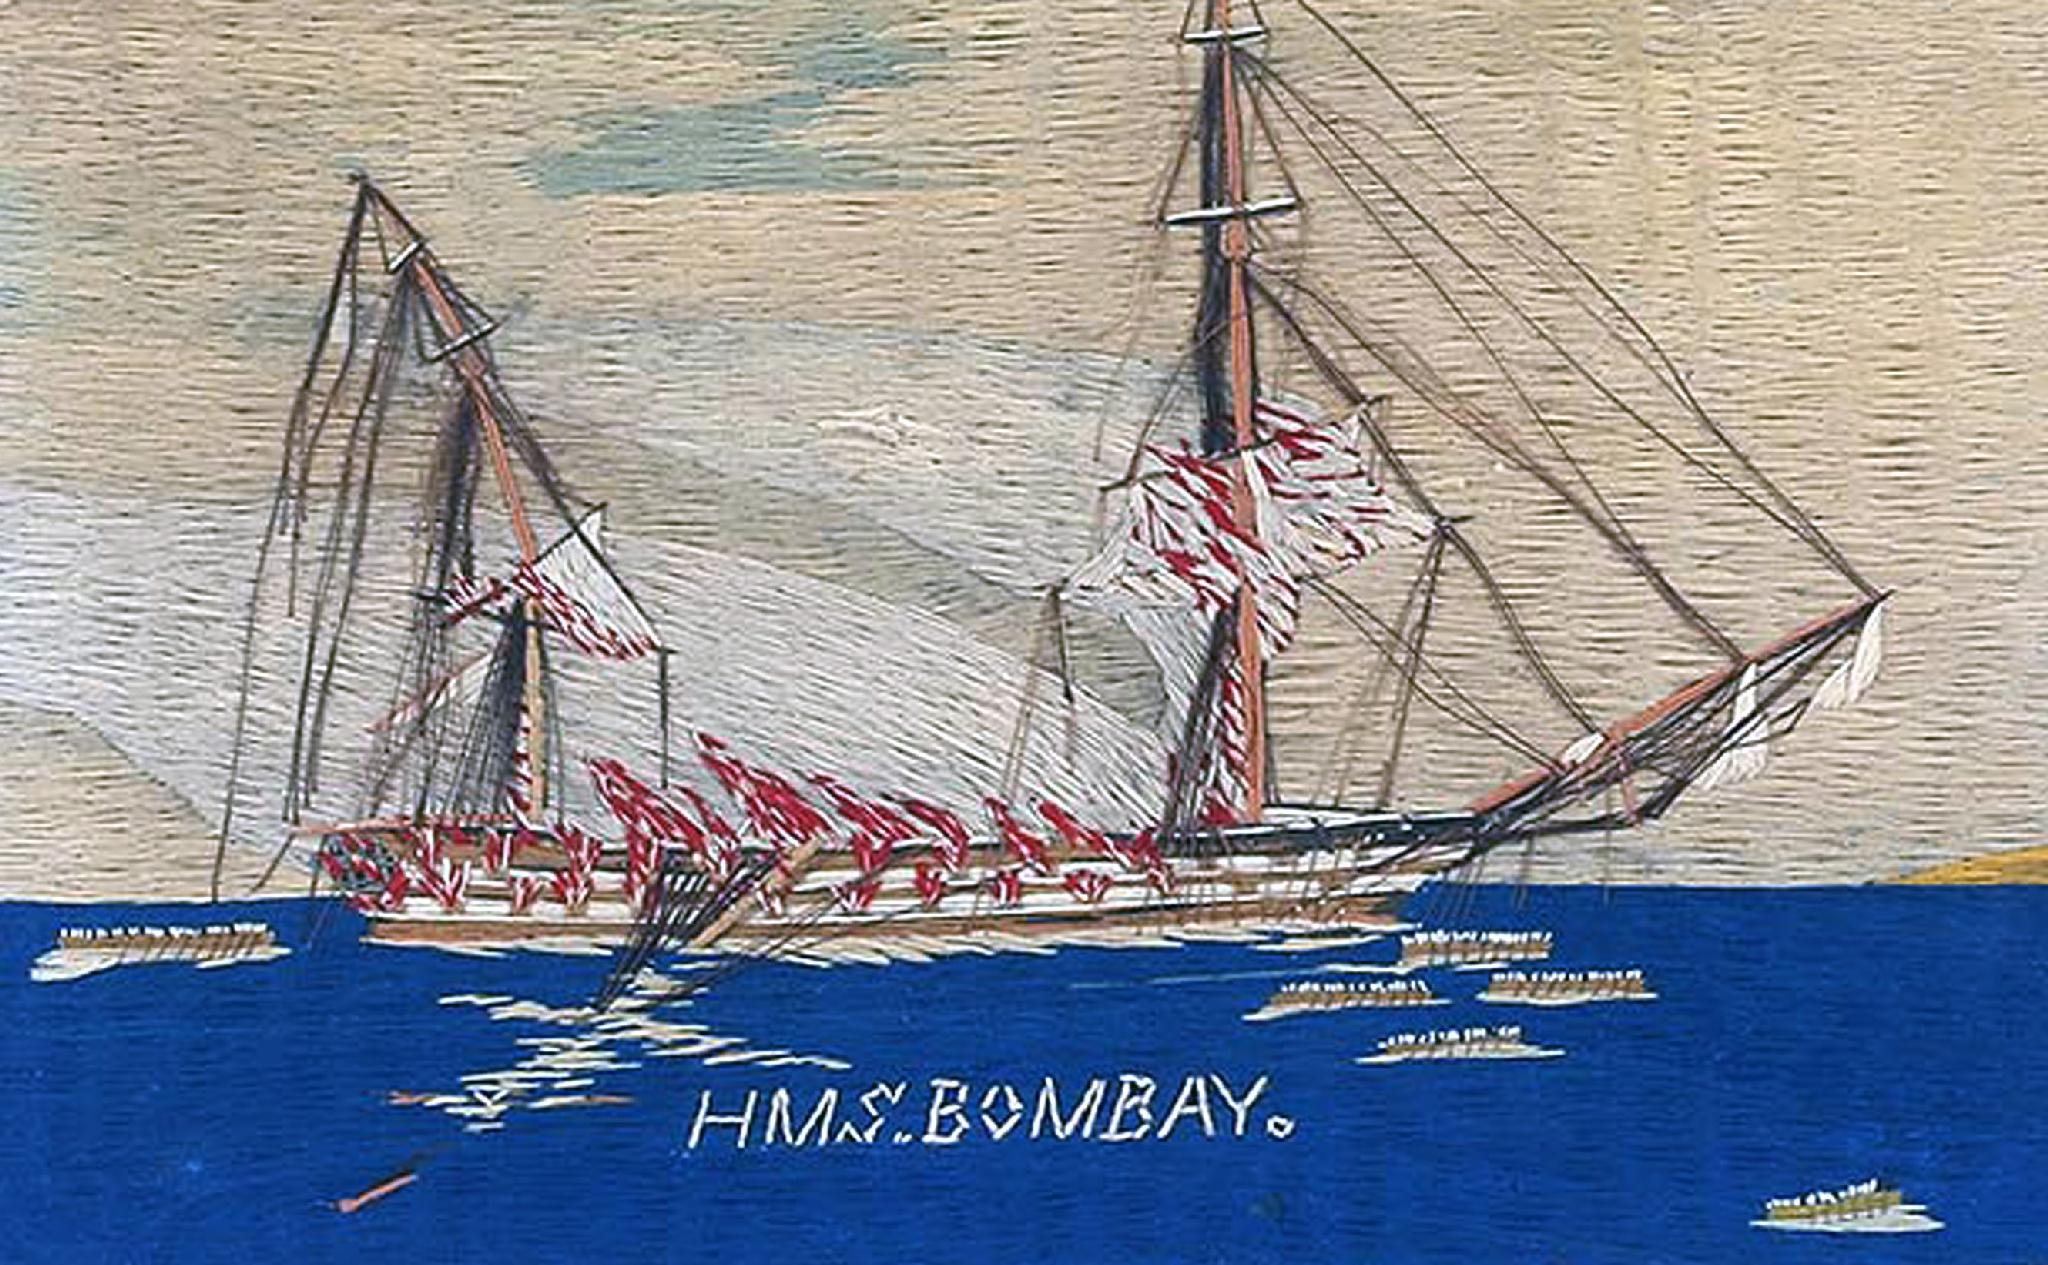 British Sailor's Woolwork picture of H.M.S. Bombay on Fire, (December 22, 1864),
circa 1865

The woolie depicts H.M.S. Bombay, a Canopus-class ship of the line, on fire with many small longboats with men at the oars surrounding the ship which is